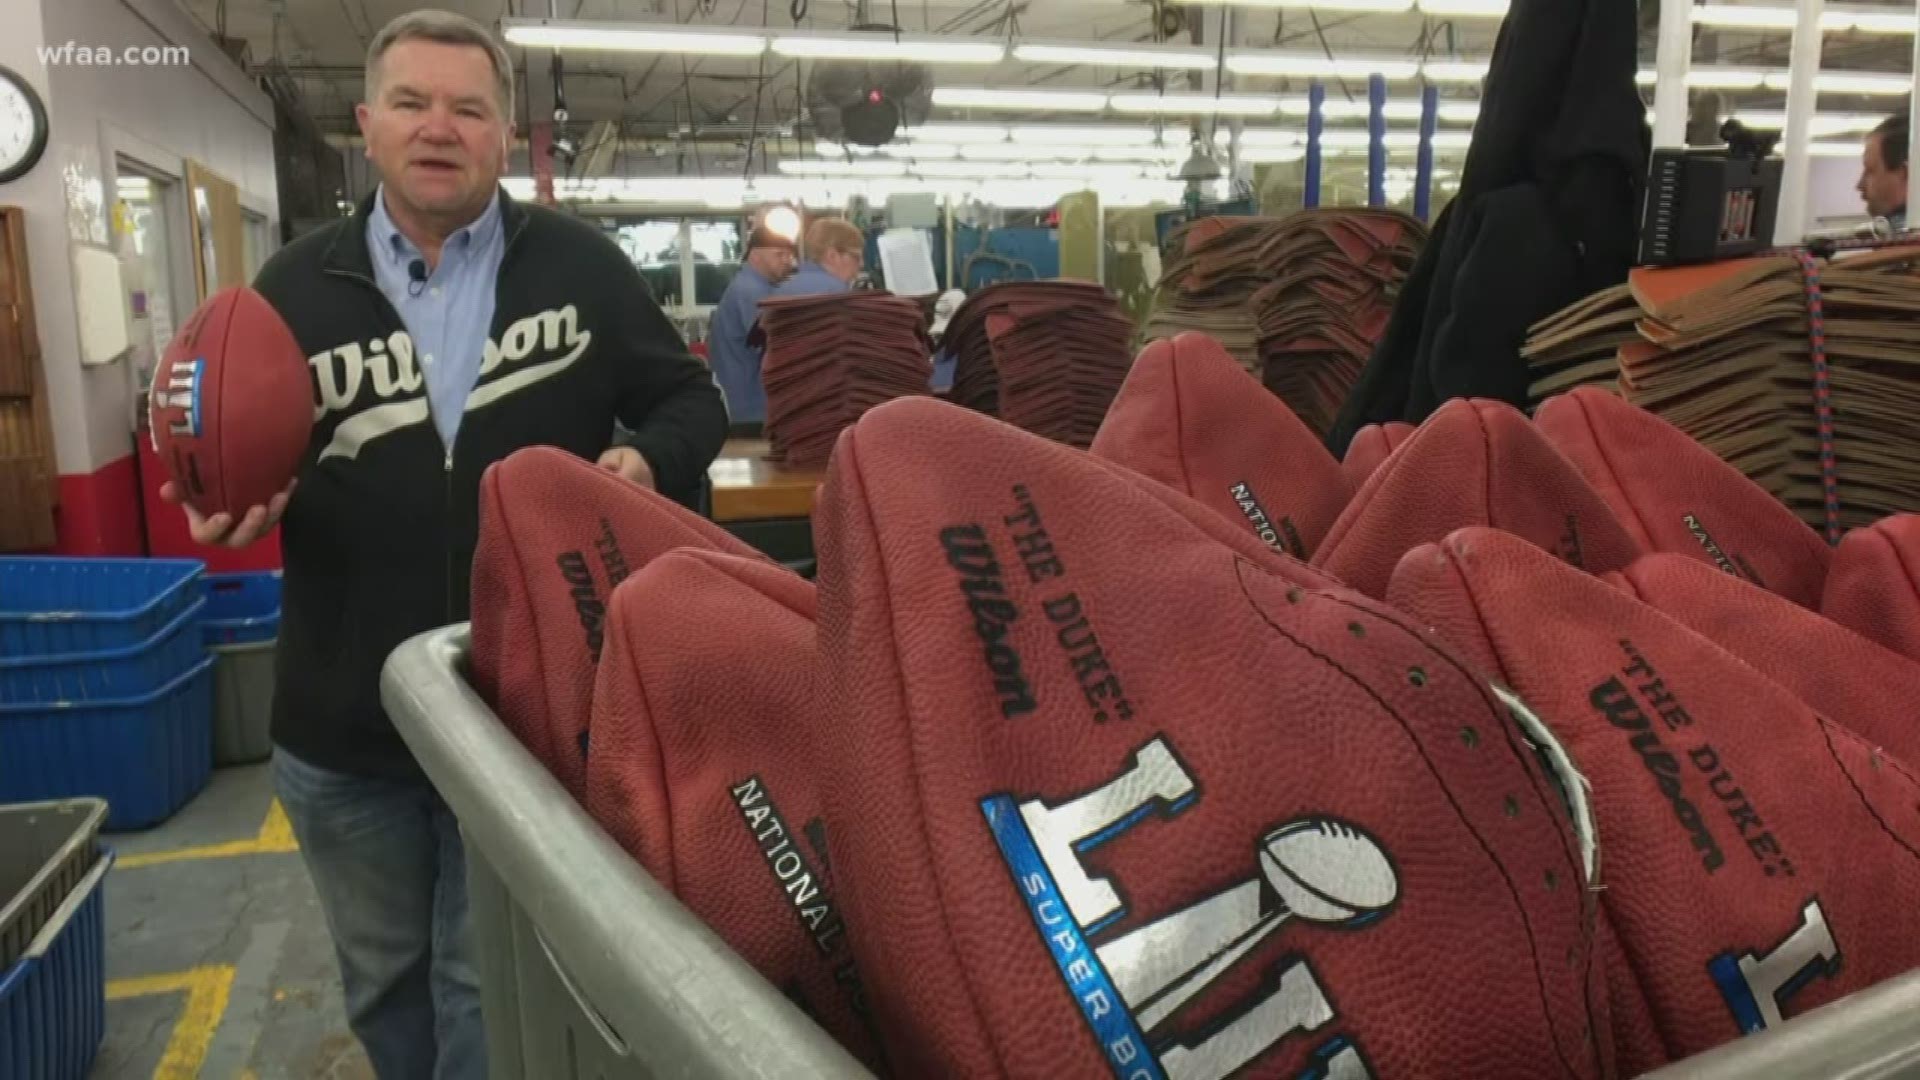 The Super Bowl is a glamorous event. The place where the footballs that will be used in the game is not. Mike Castellucci takes us to an unassuming warehouse in Ada, Ohio to watch how the footballs are made